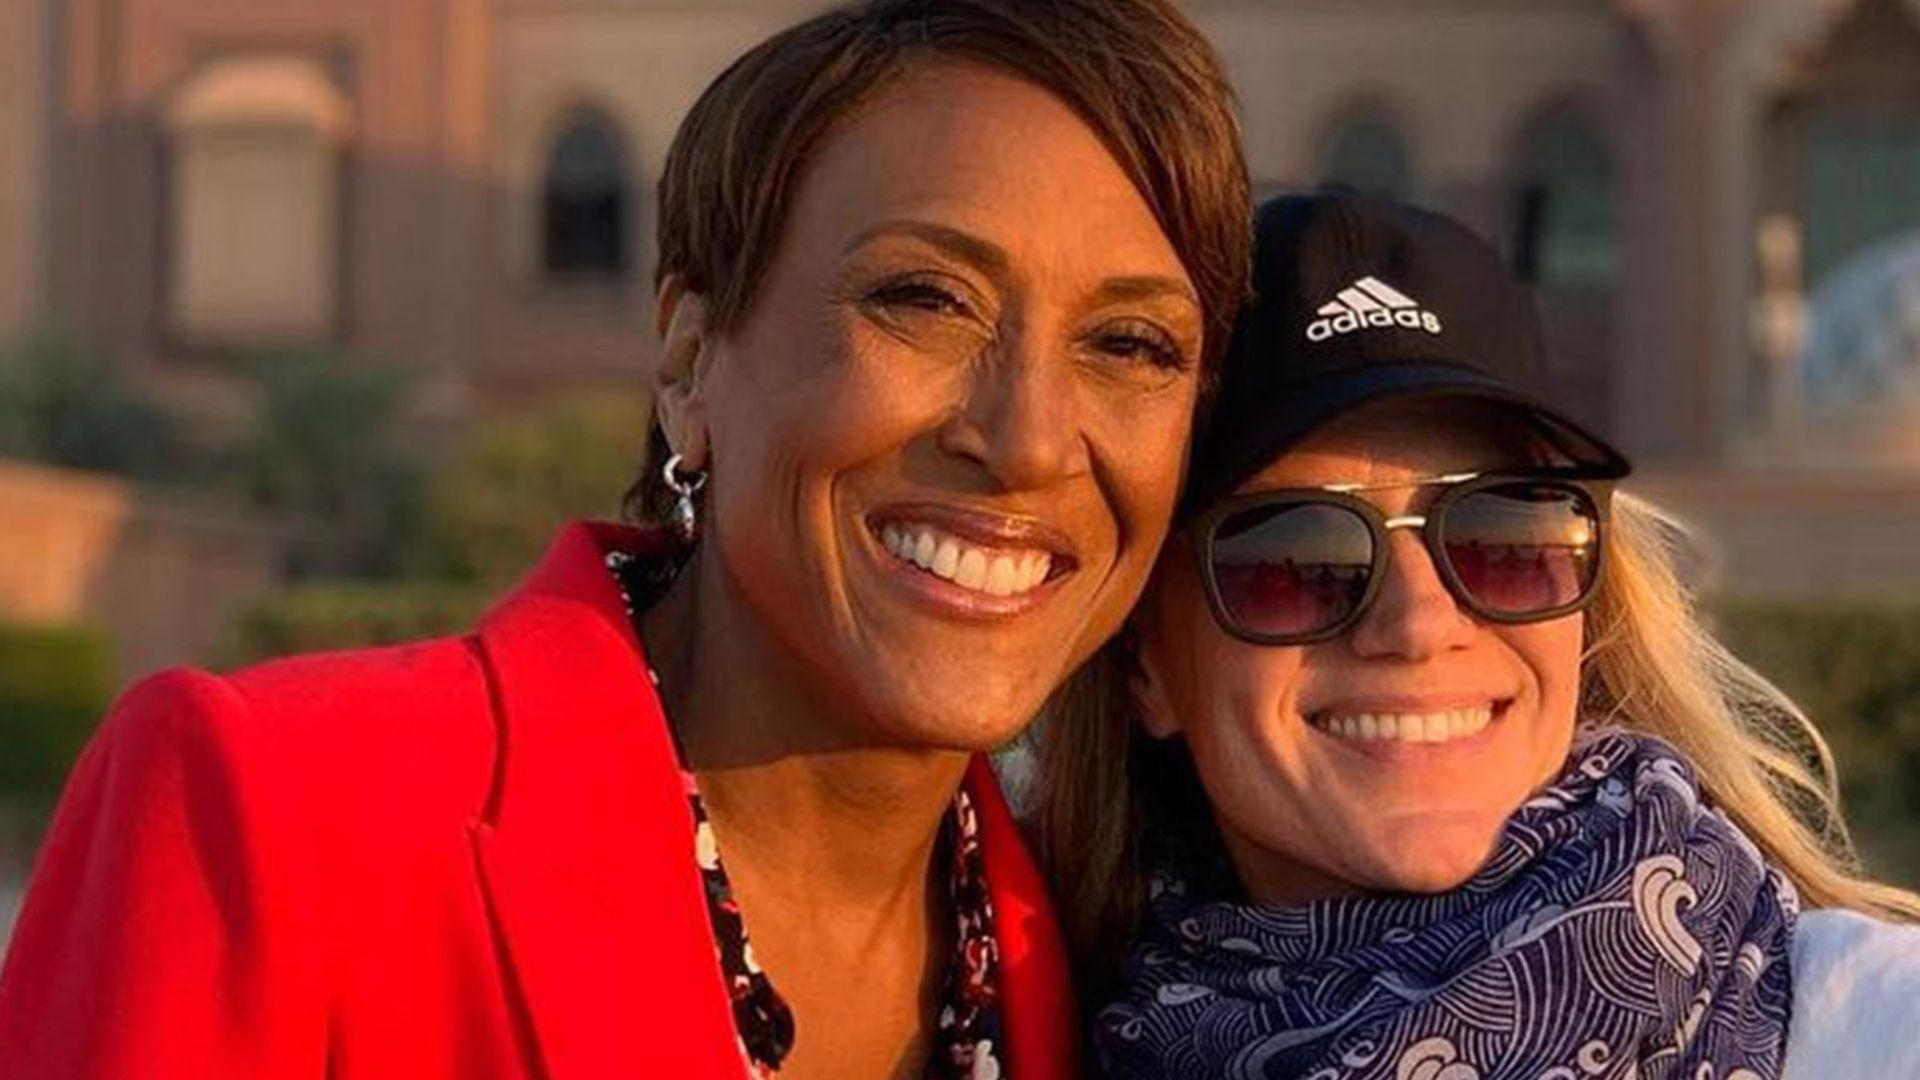 robin roberts with amber laign outside